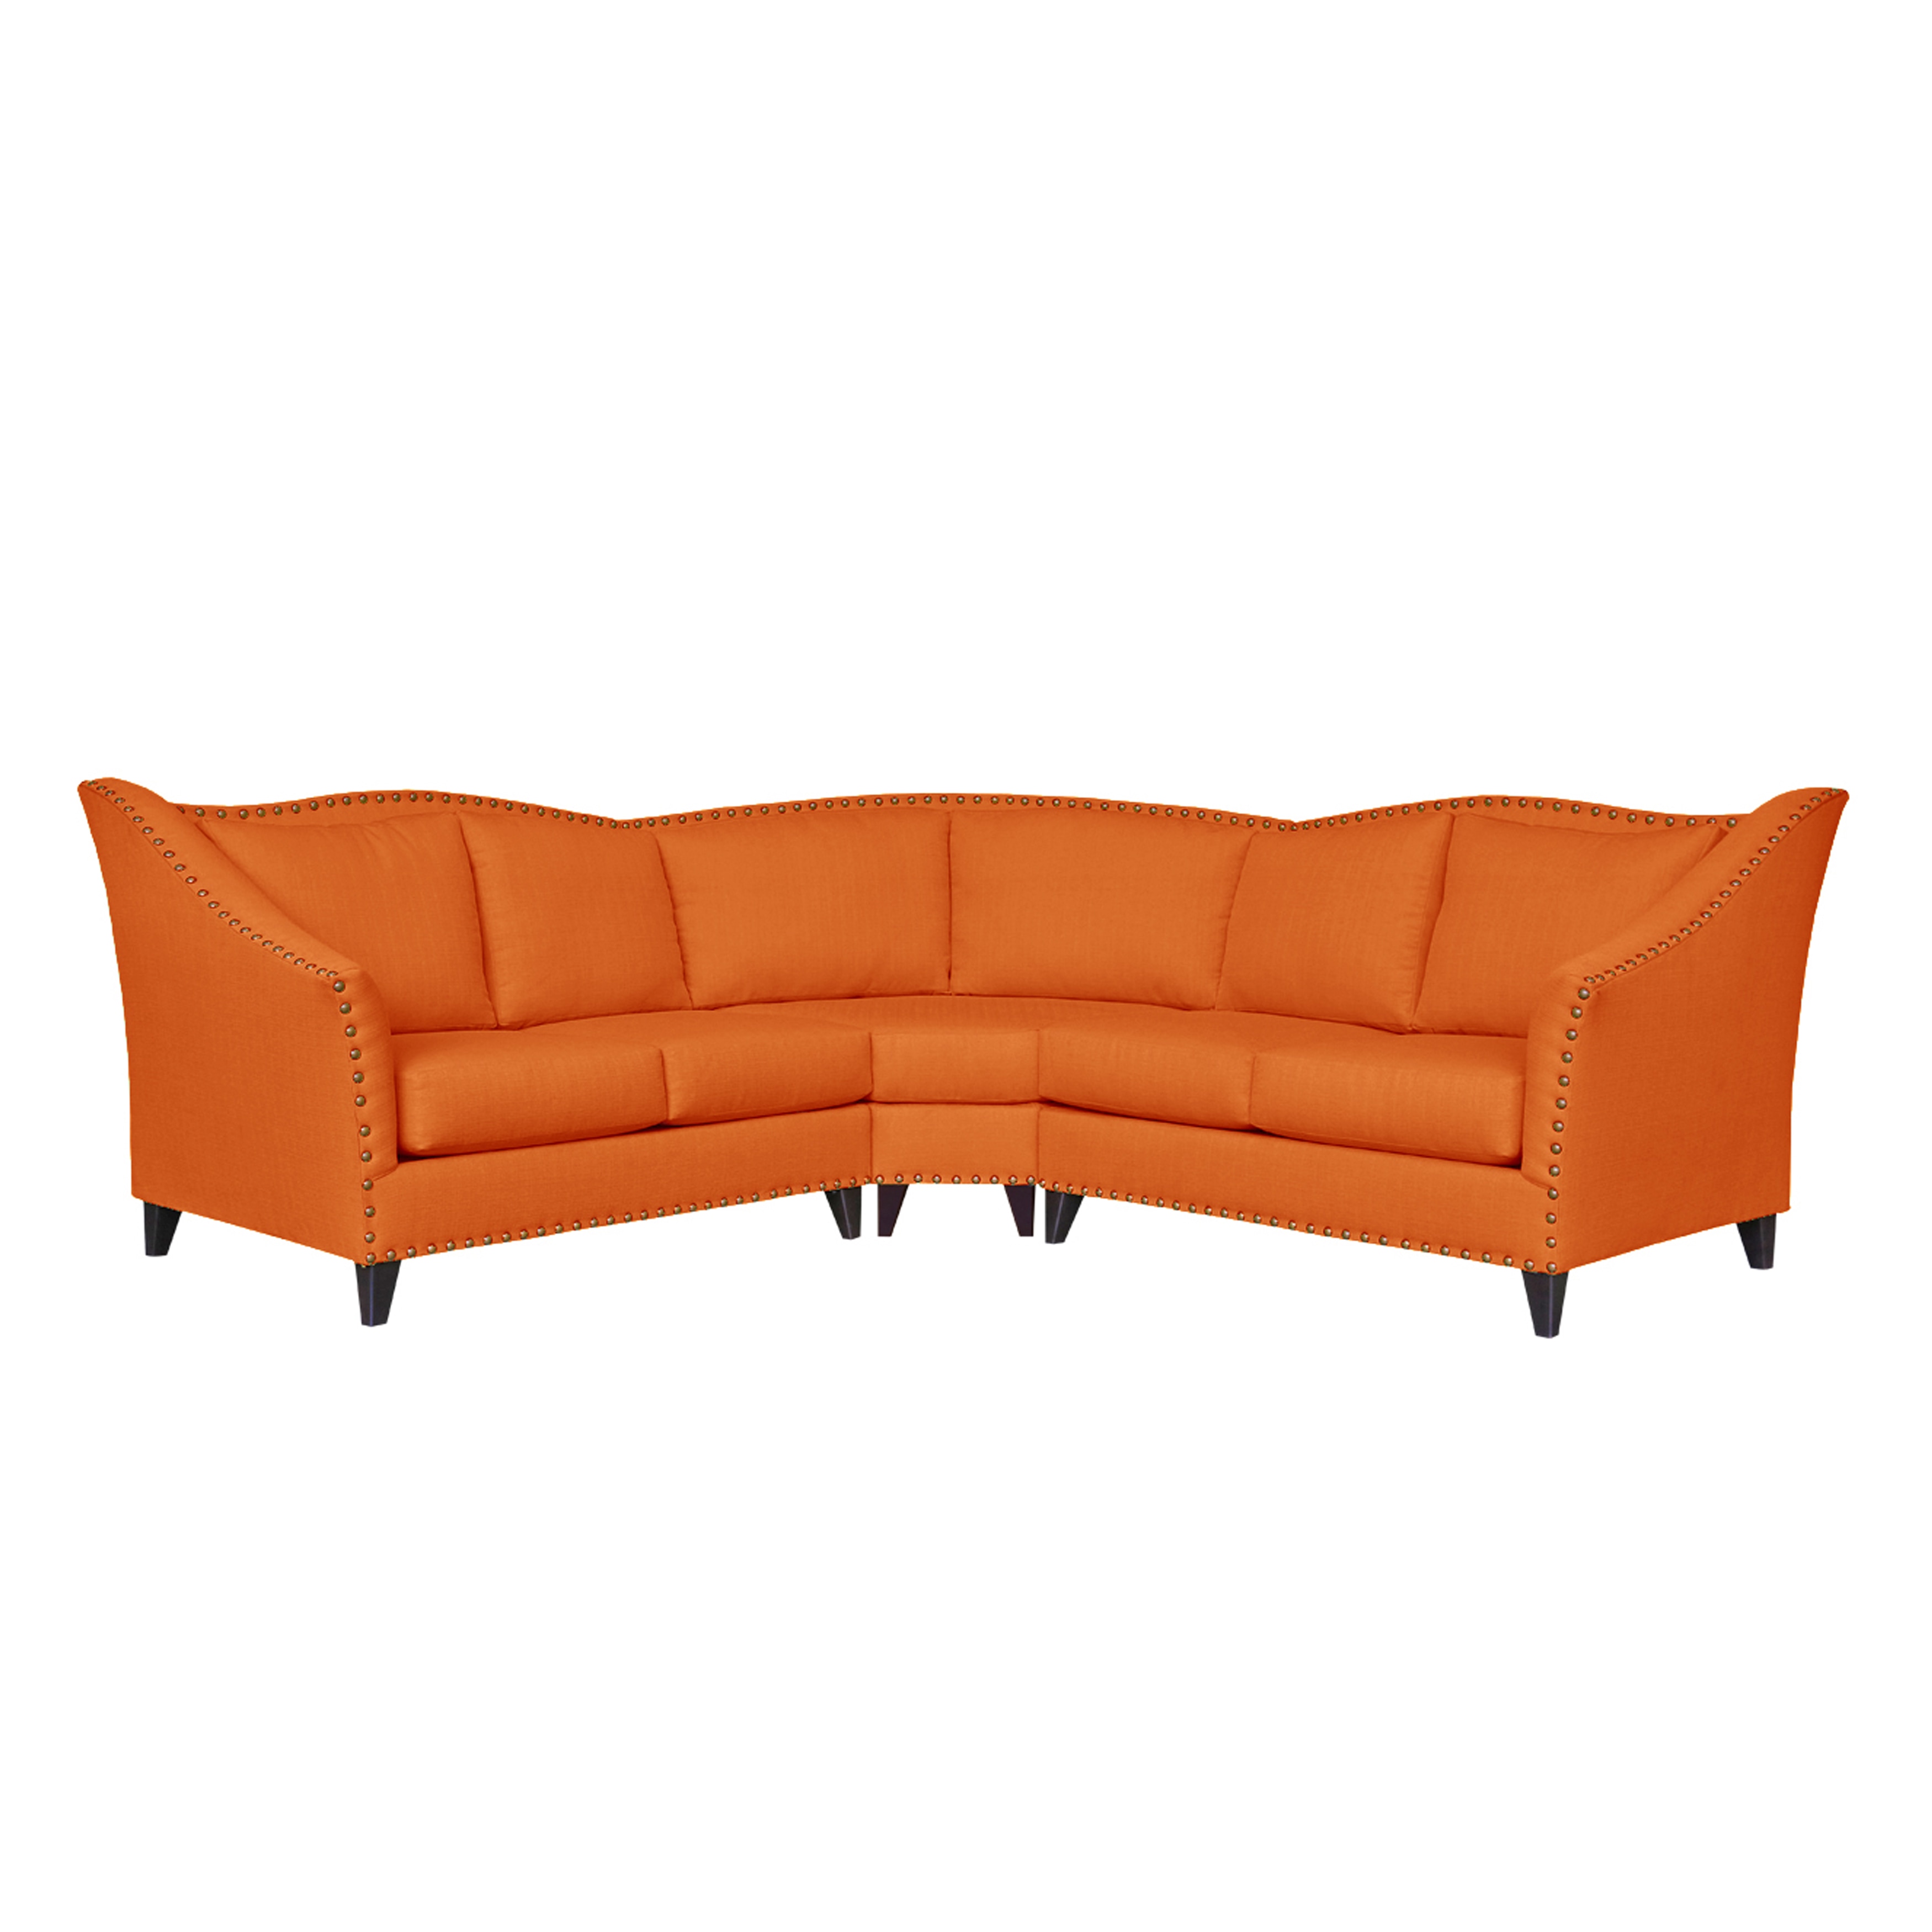 Featured image of post Burnt Orange Sectional Sofa - Burnt orange sectional at wayfair, we want to make sure you find the best home goods when you shop online.